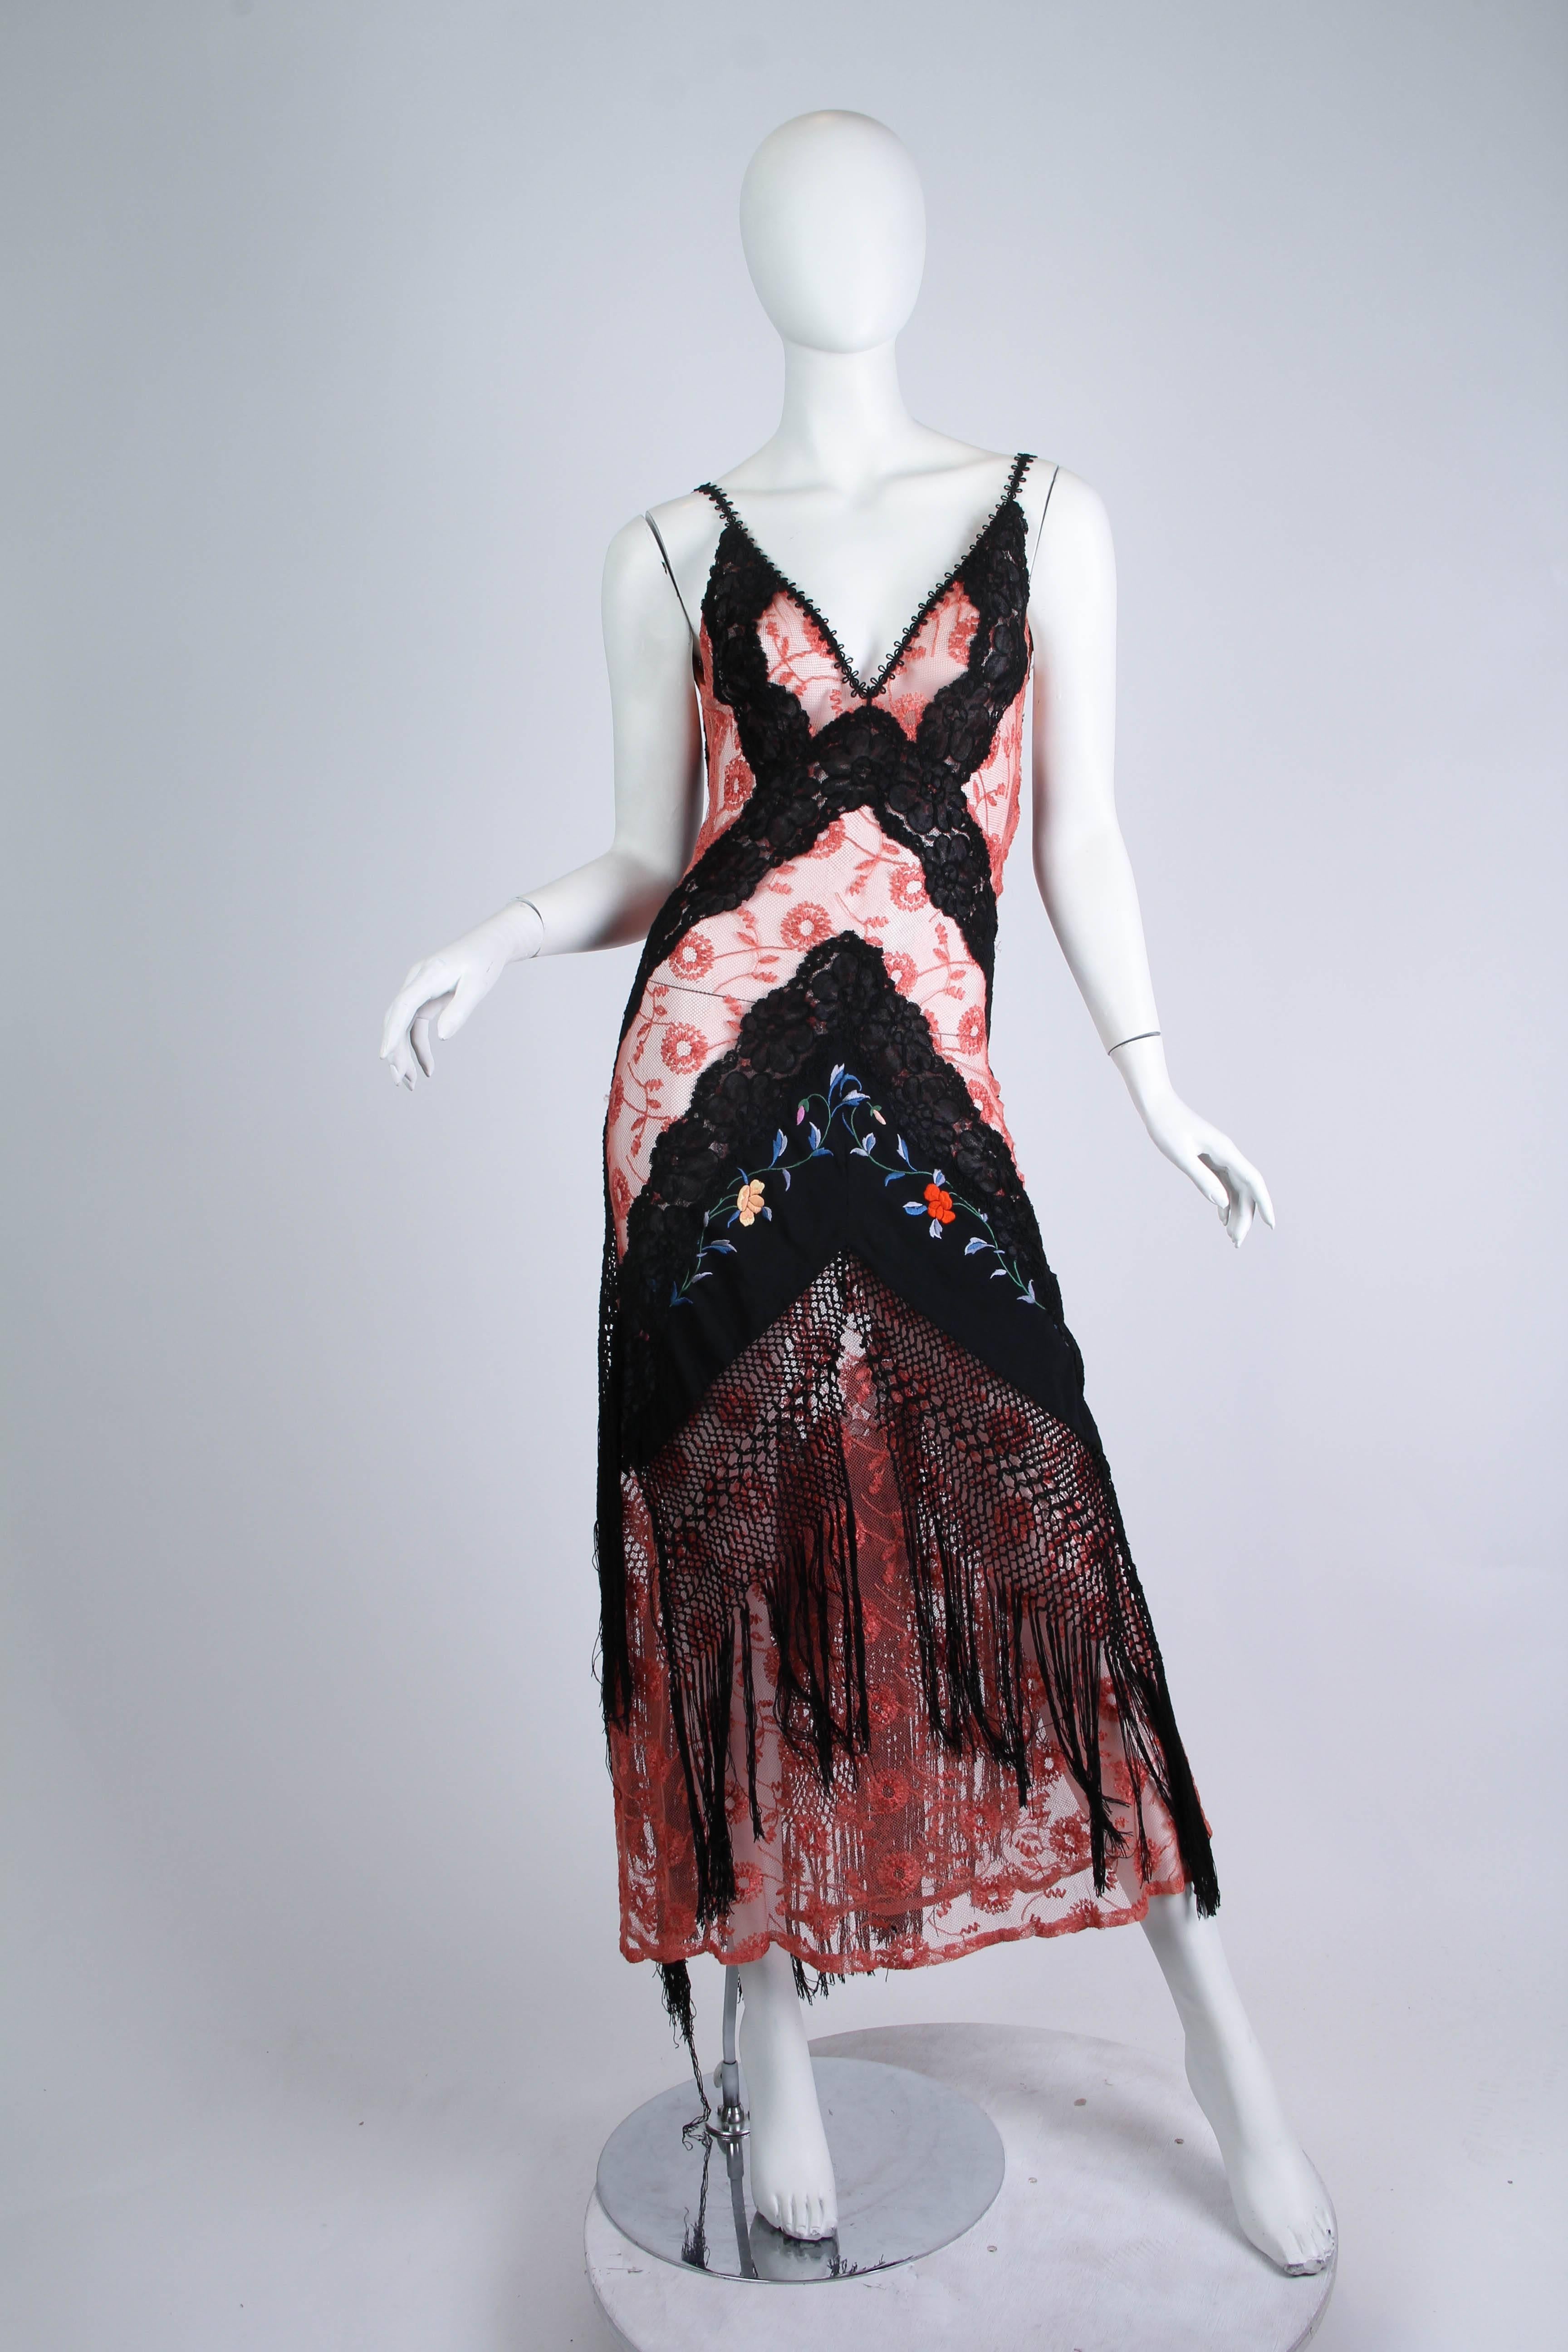 1930s Bias Cut Silk Net Lace Dress Re-Built with Chinese Embroidery and Fringe 1